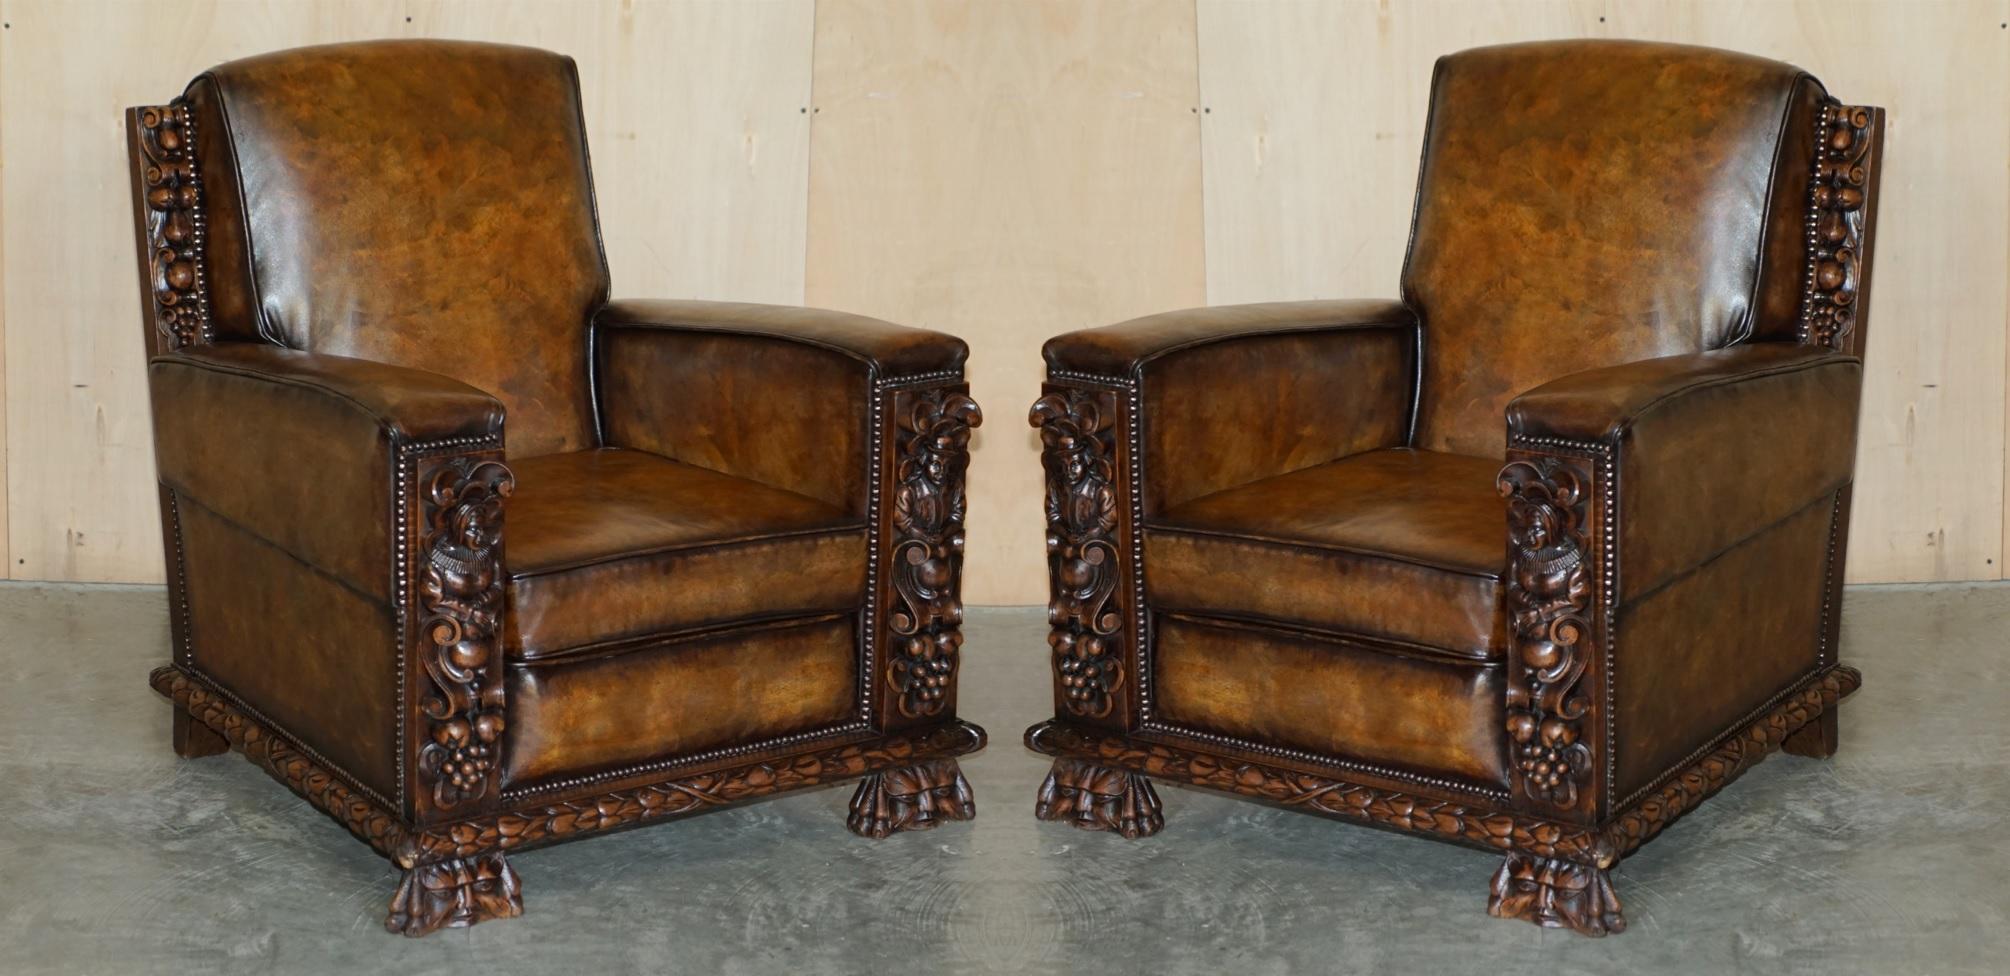 Royal House Antiques

Royal House Antiques is delighted to offer for sale four stunning fully restored antique hand dyed Cigar brown leather club armchairs with Gothic carved panels 

Please note the delivery fee listed is just a guide, it covers